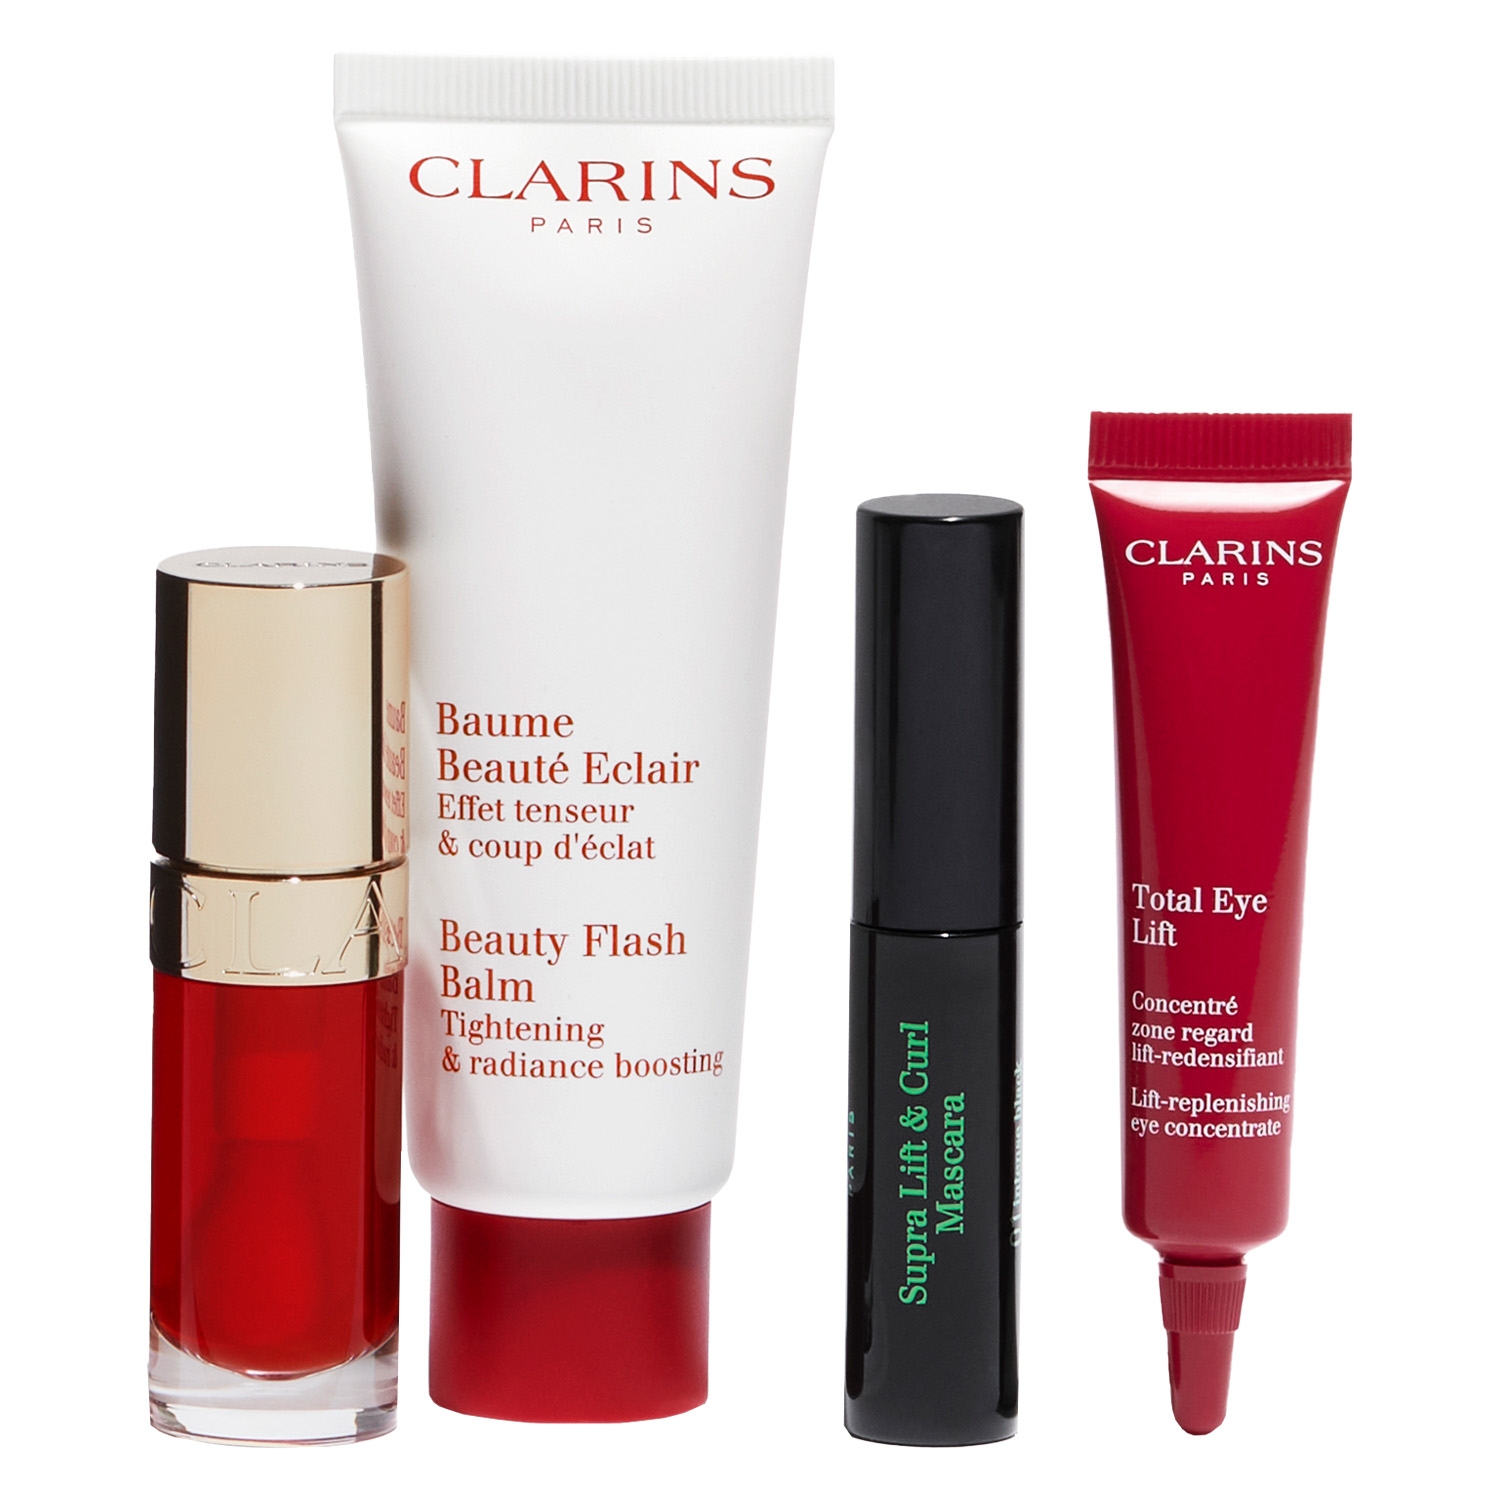 Product image from Clarins Specials - Iconic Offer